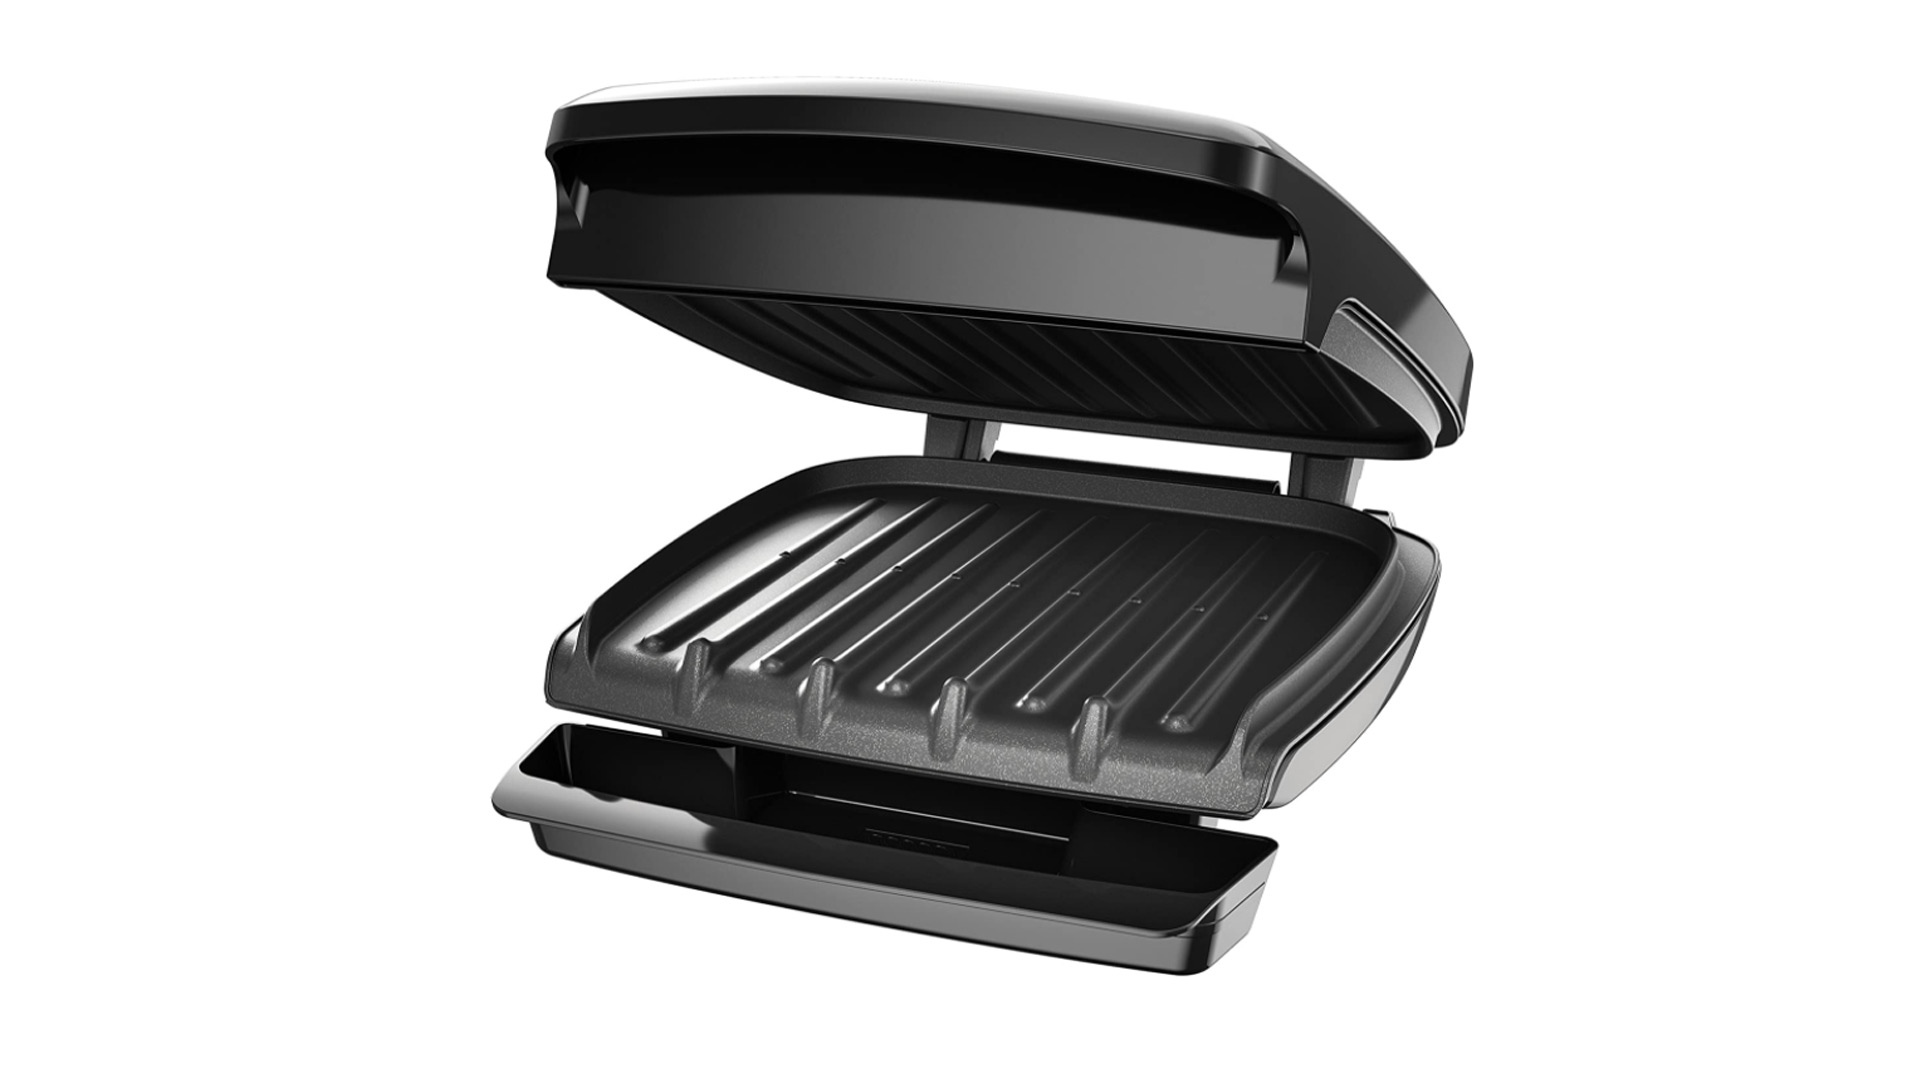 George Foreman GR340FB-4 Fixed Plate Grill